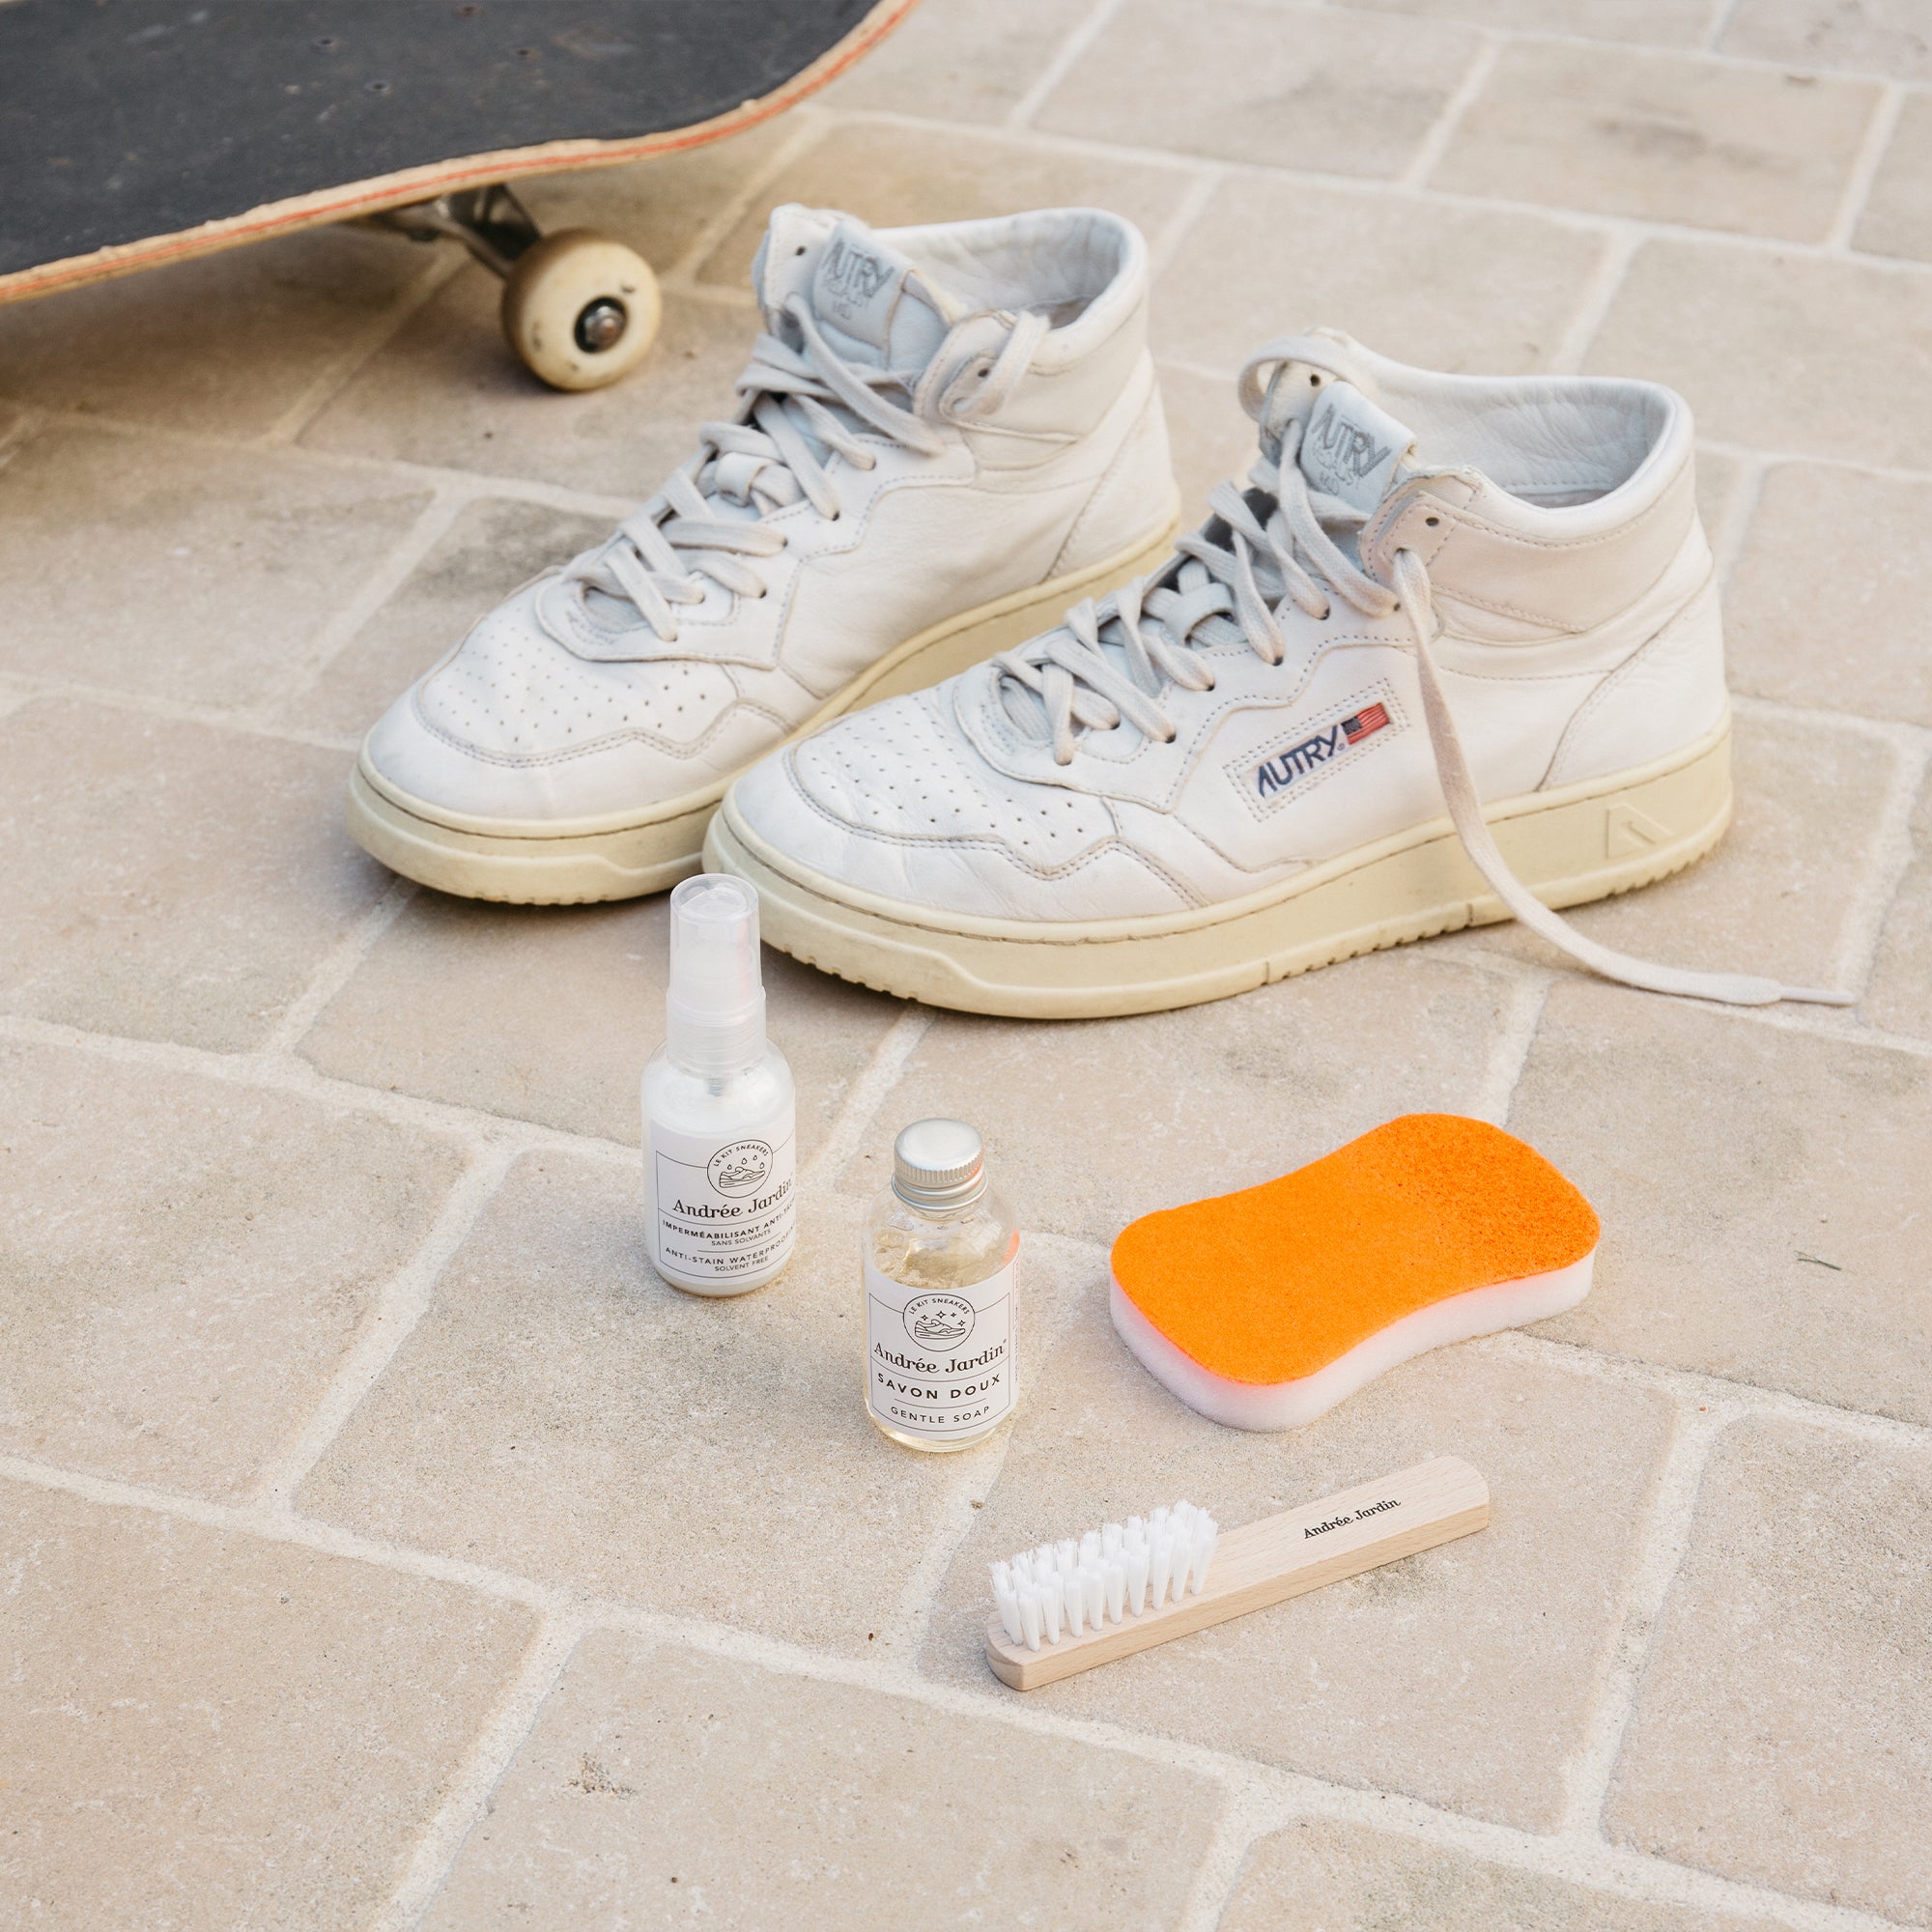 Sneaker trainer cleaning kit